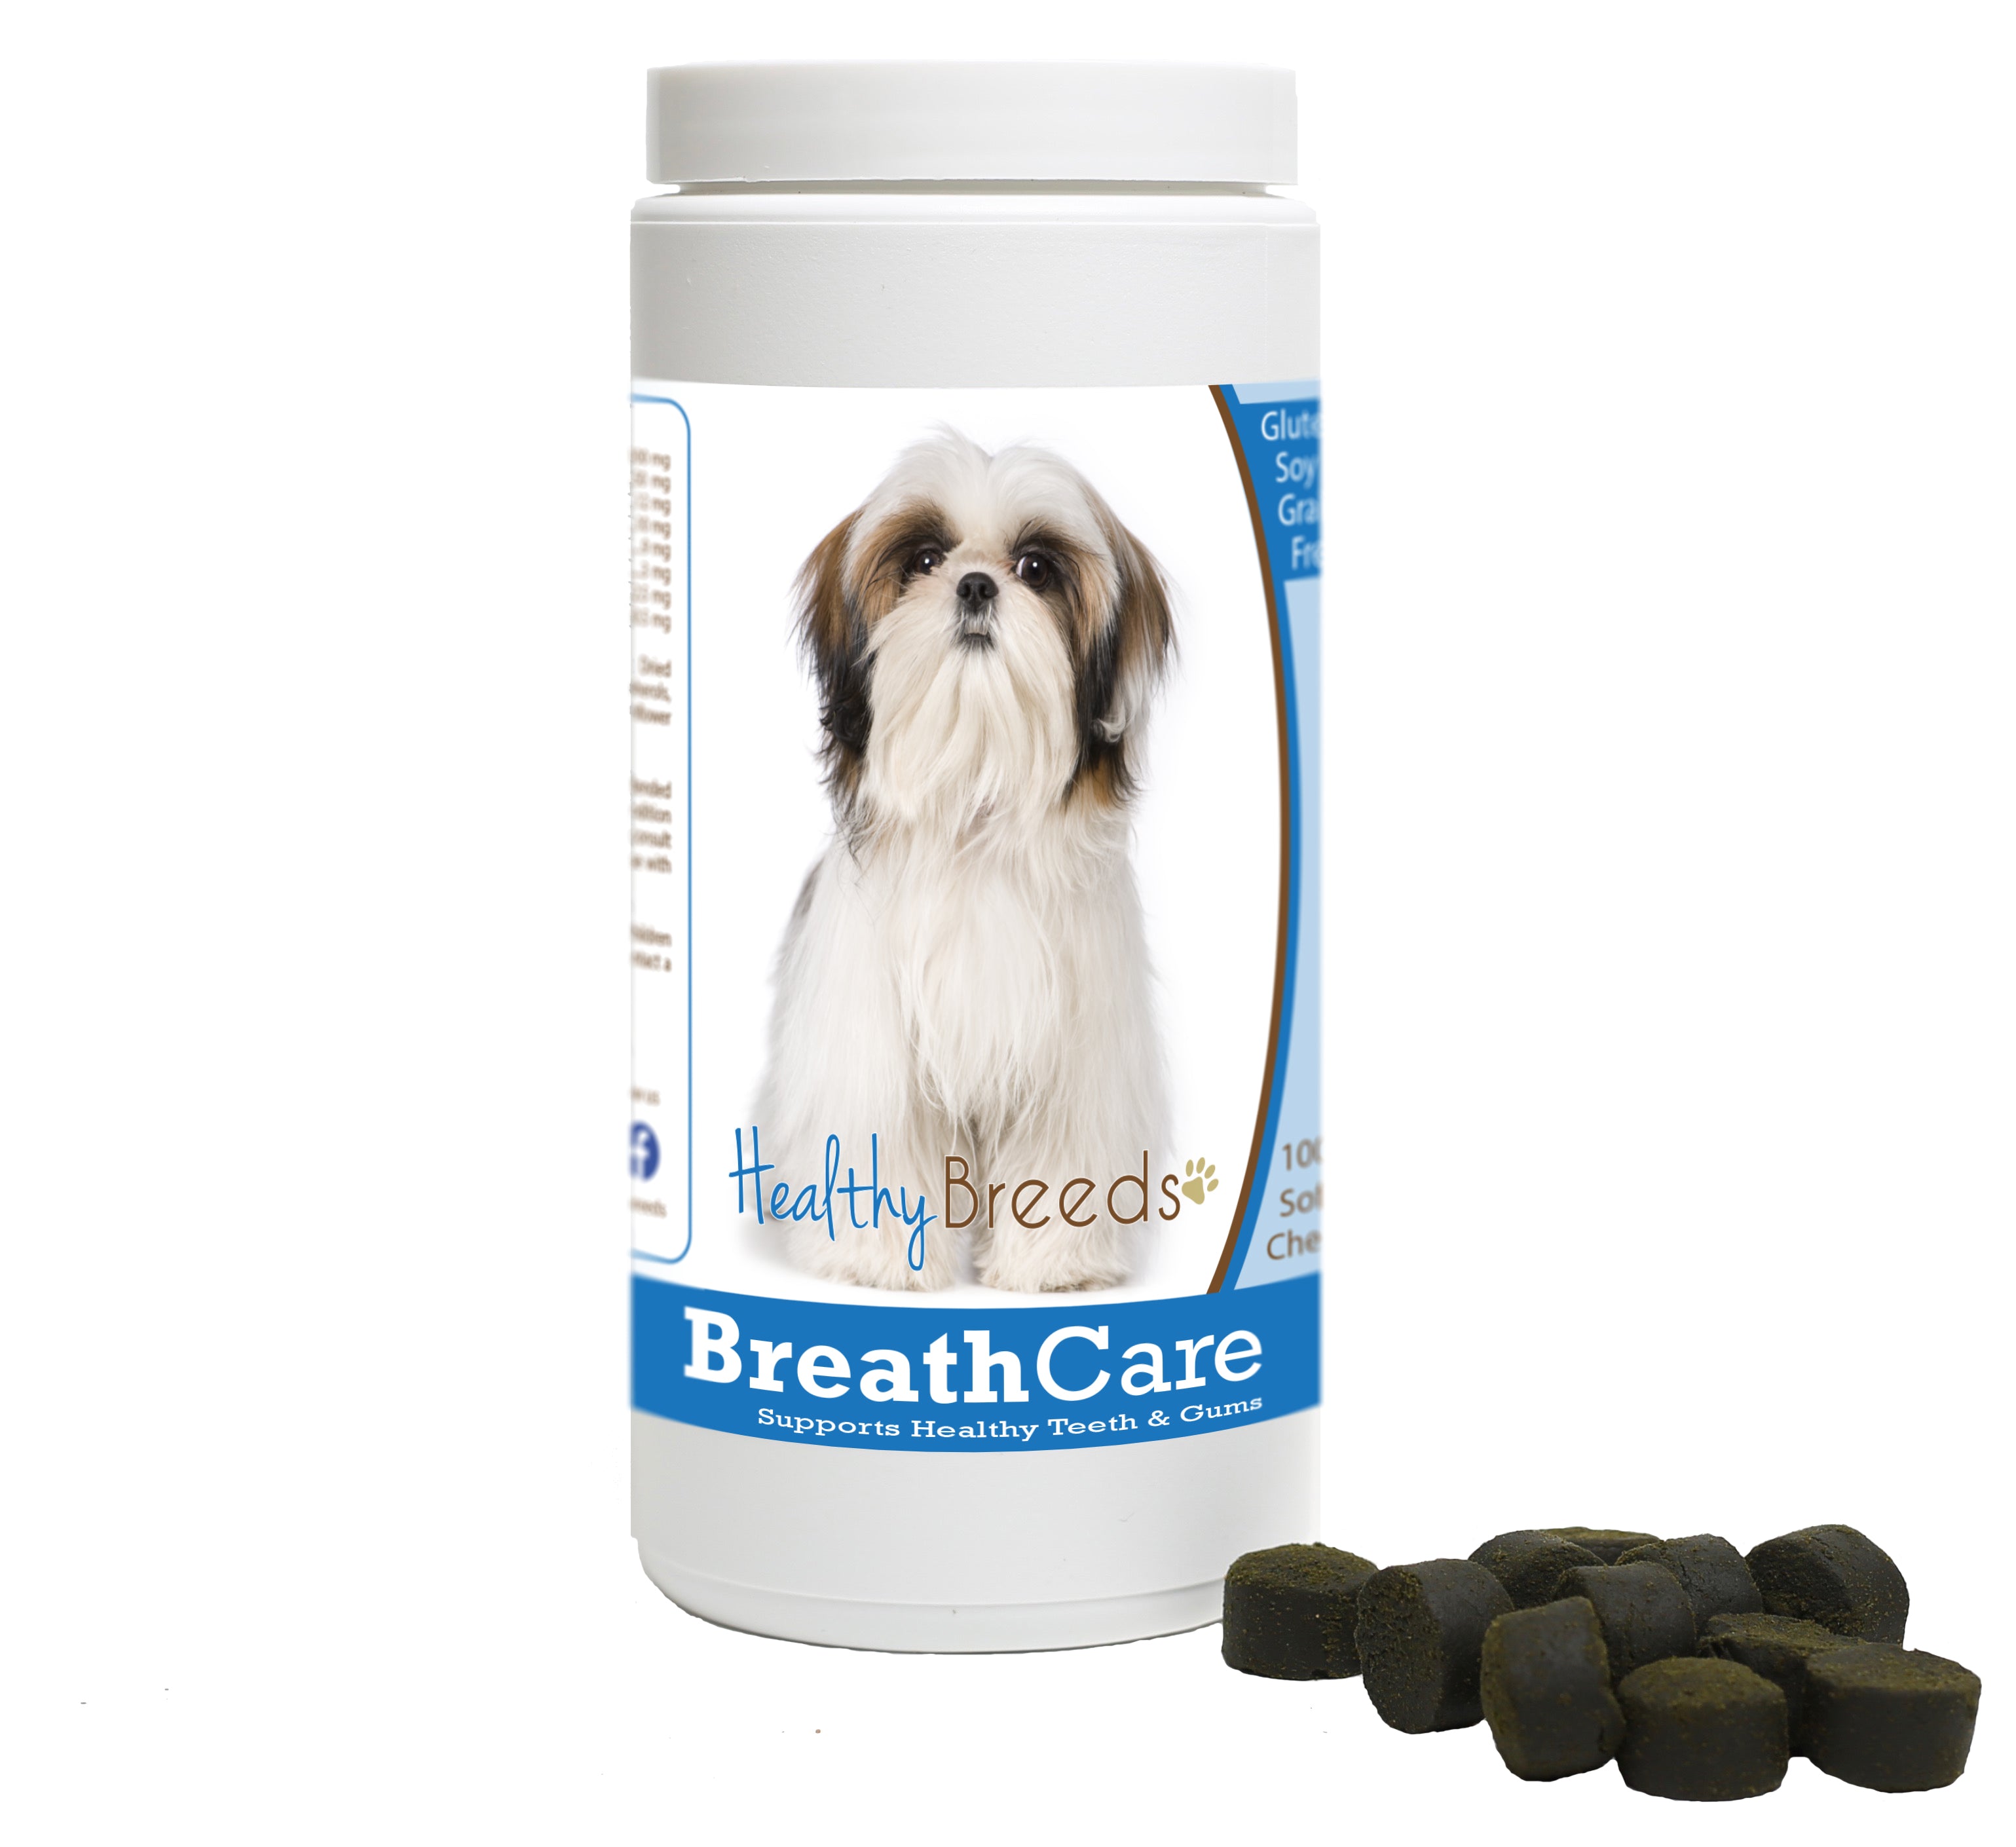 Shih Tzu Breath Care Soft Chews for Dogs 60 Count